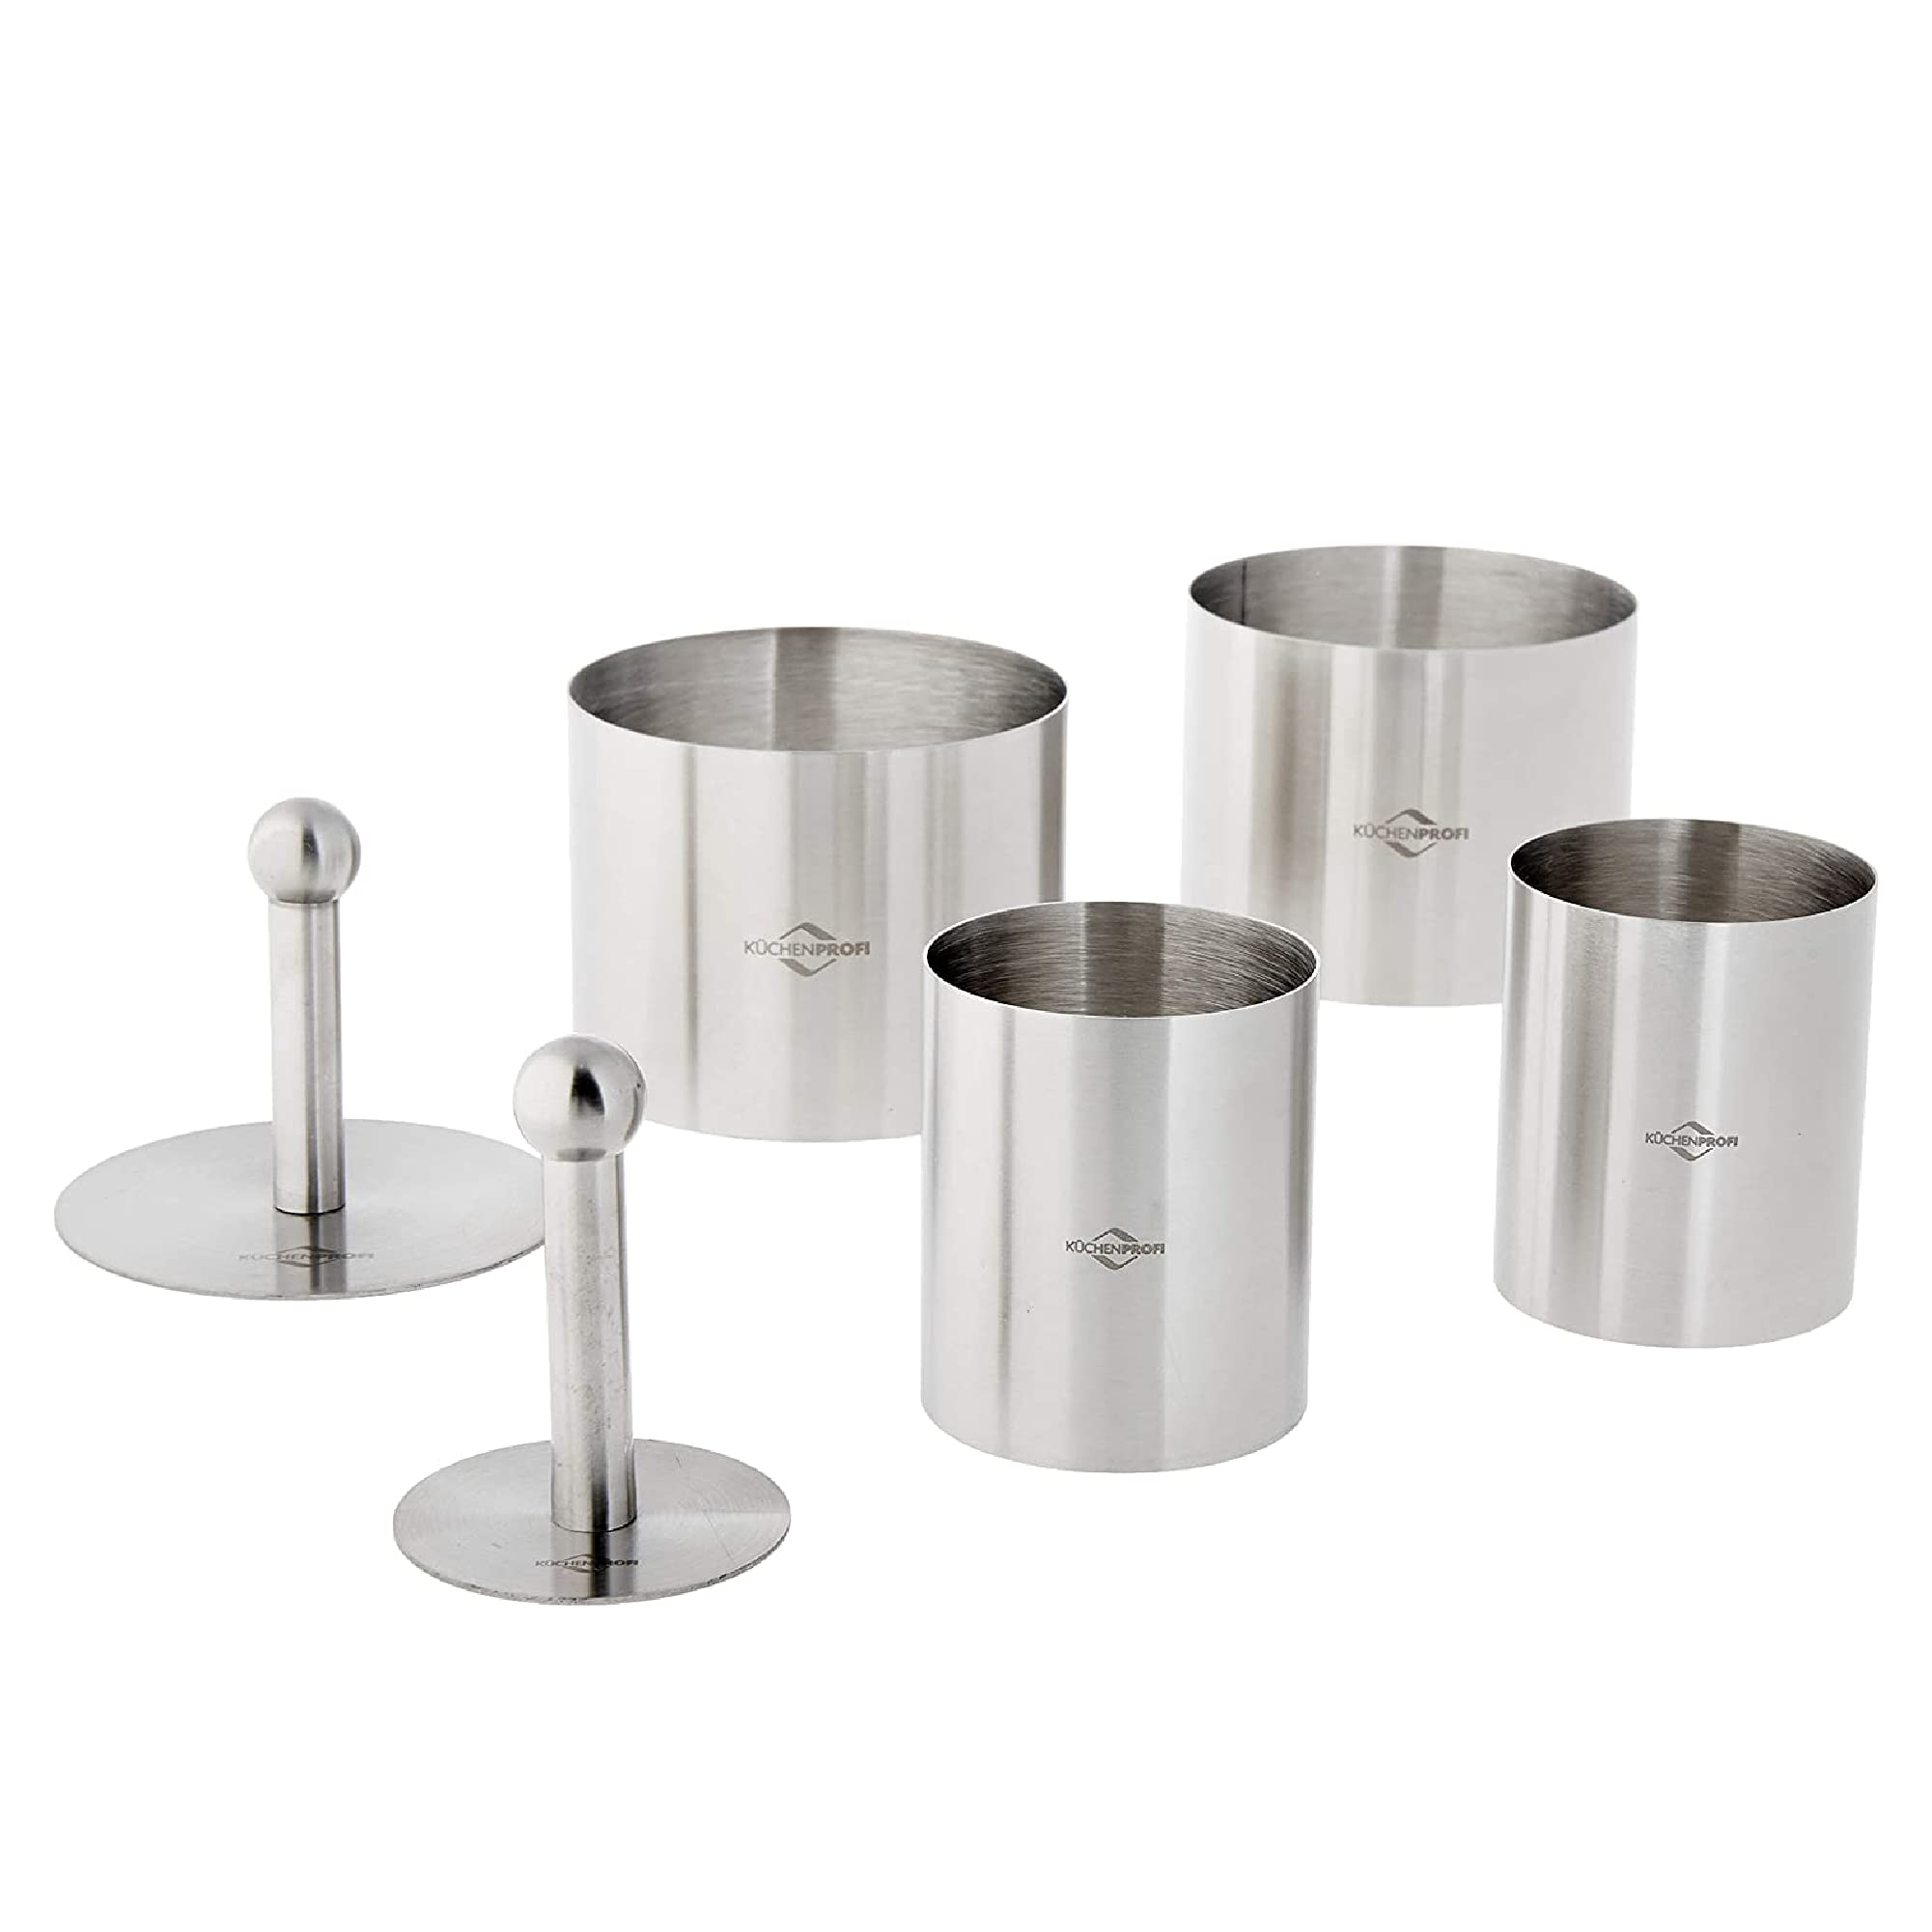 Küchenprofi Stainless Steel 6-Piece Forming Rings with Tamper/Pushers, Silver